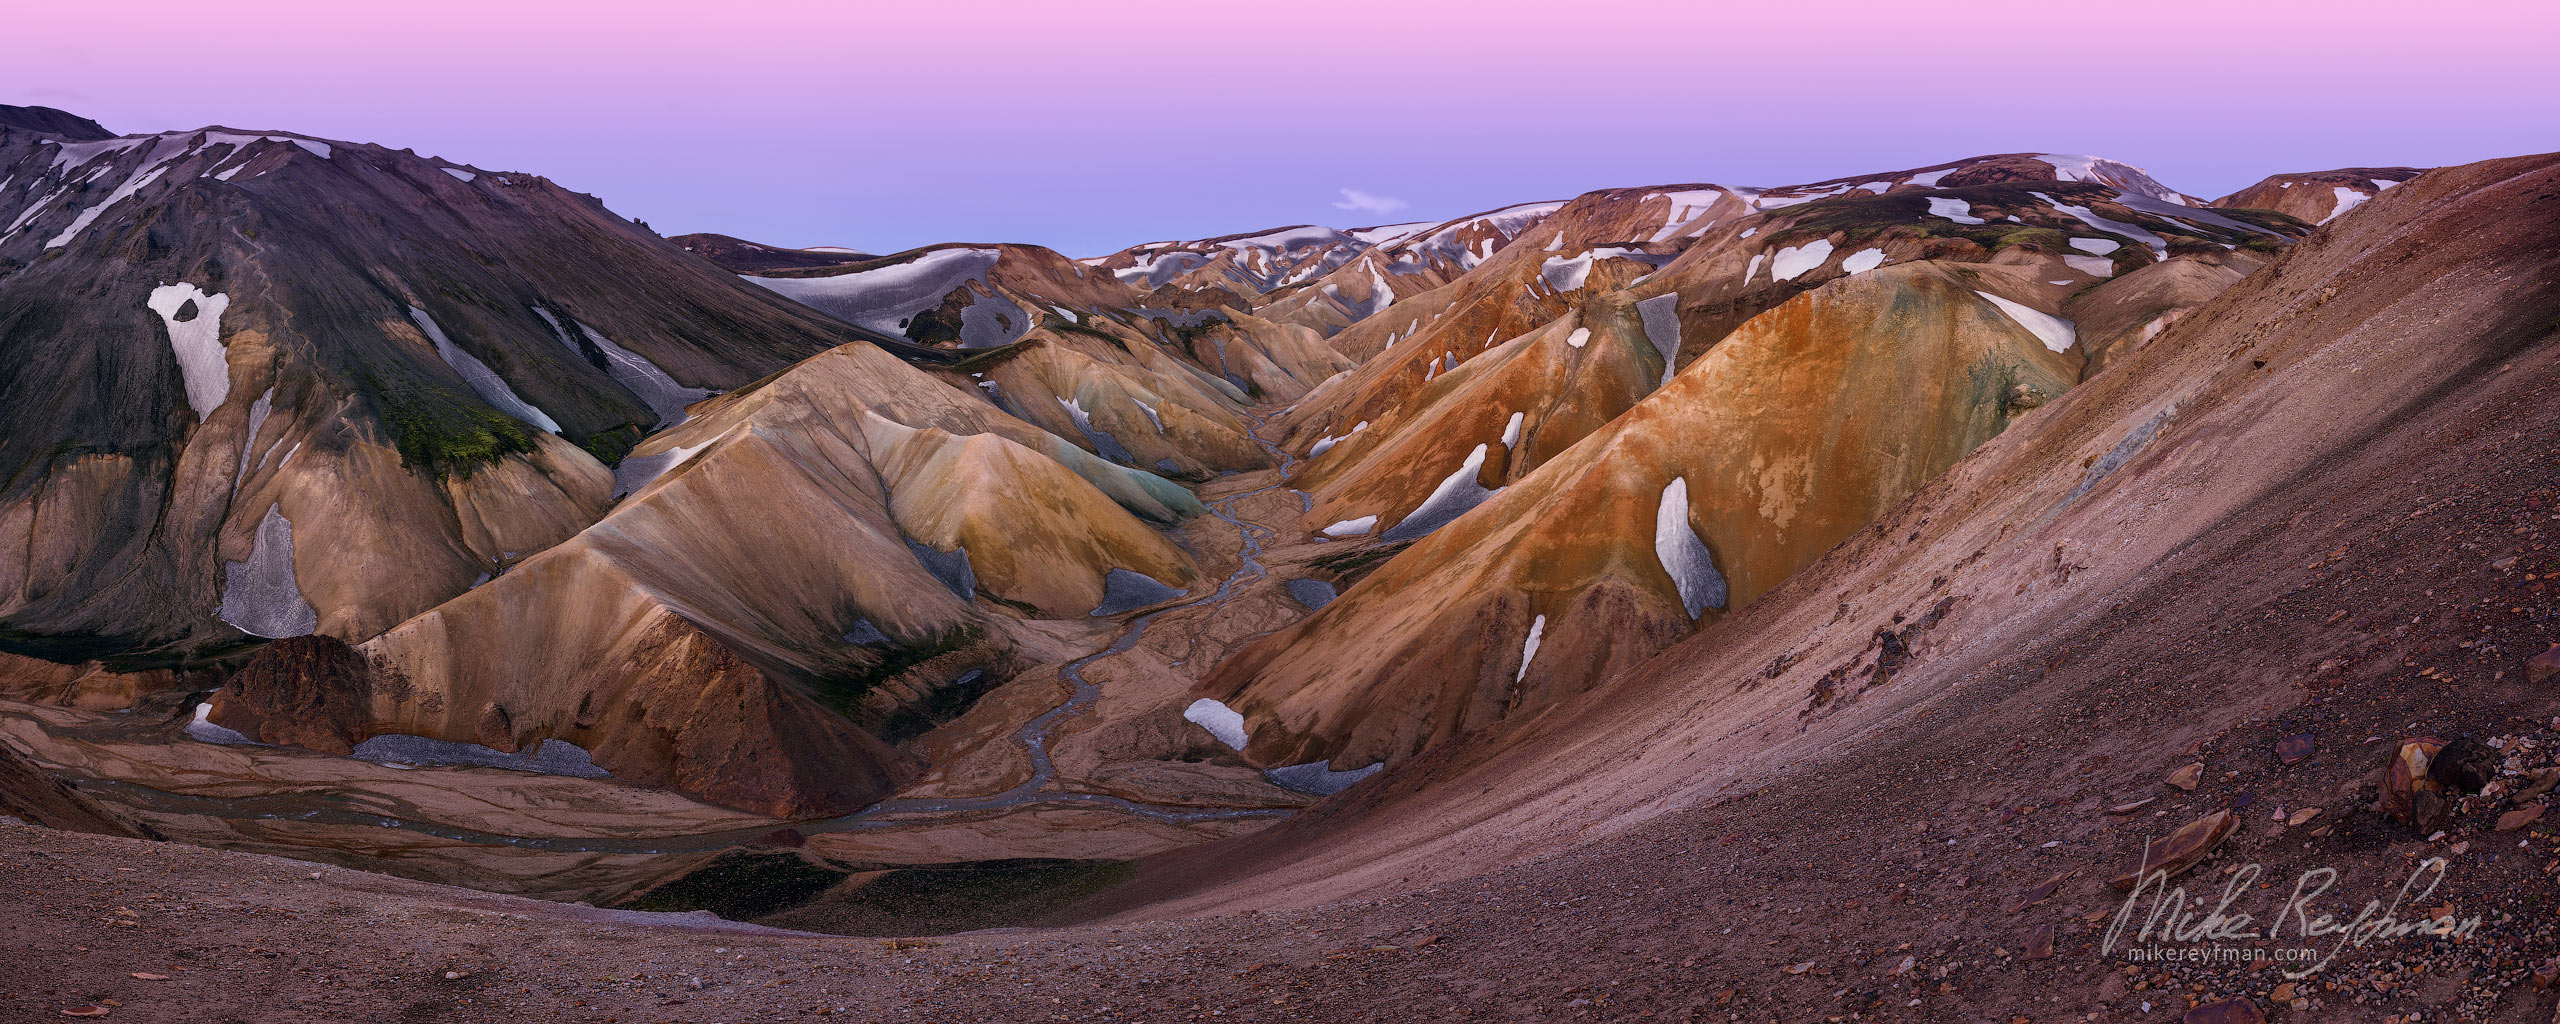 The view from the Brennisteinsalda Volcano into Colored Rhyolite Mountains of Landmannalaugar, Fjallabak Nature Reserve, Cental Highlands, Iceland. 003-IC-GP _D8B4260-65_Pano-1x2.55 - Rhyolite Mountains, Crater Lakes, Geothermal Areas, Lava Fields and Glacial Rivers. Iceland.  - Mike Reyfman Photography